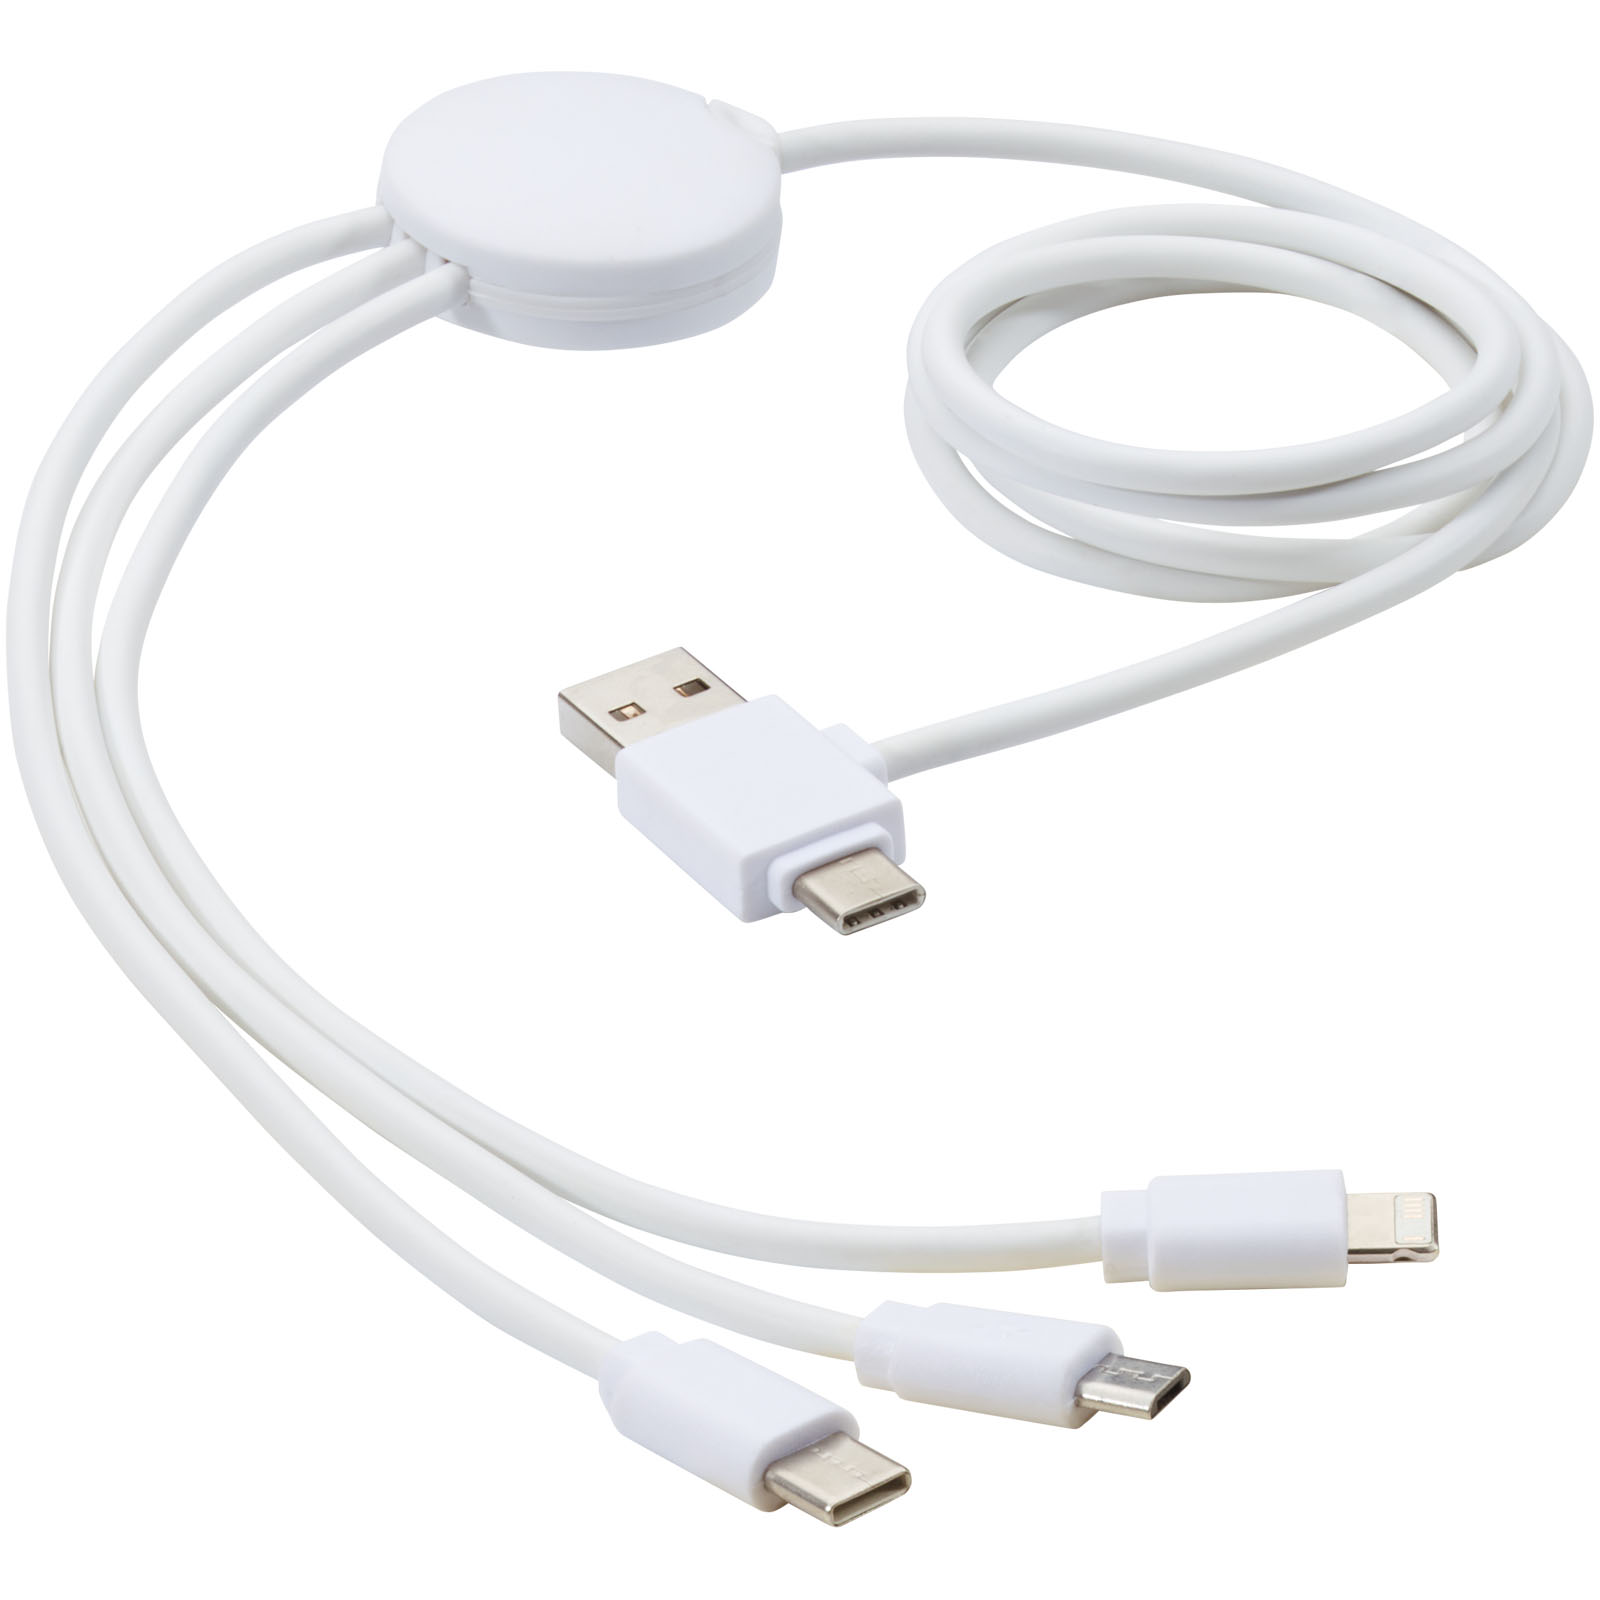 Advertising Cables - Pure 5-in-1 charging cable with antibacterial additive - 0